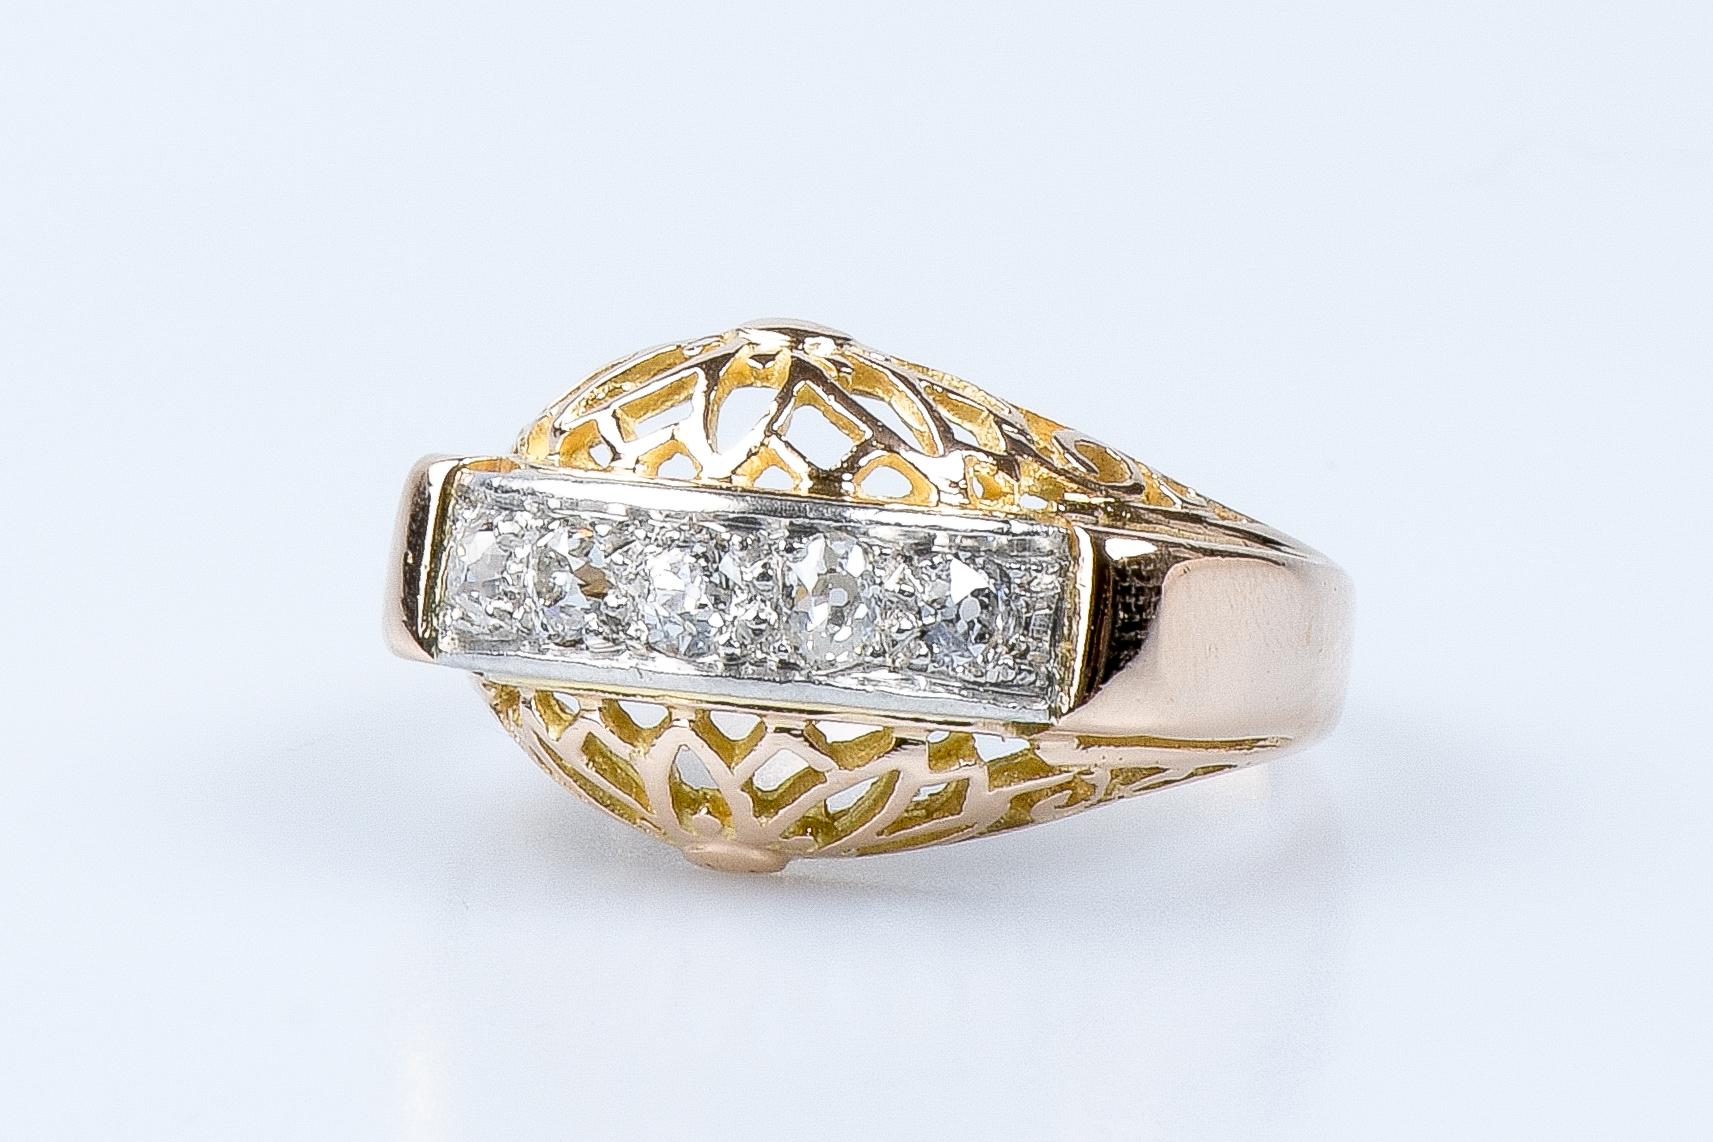 For Sale:  18 carat yellow and white gold ring designed with 5 round brillant cut diamonds 13